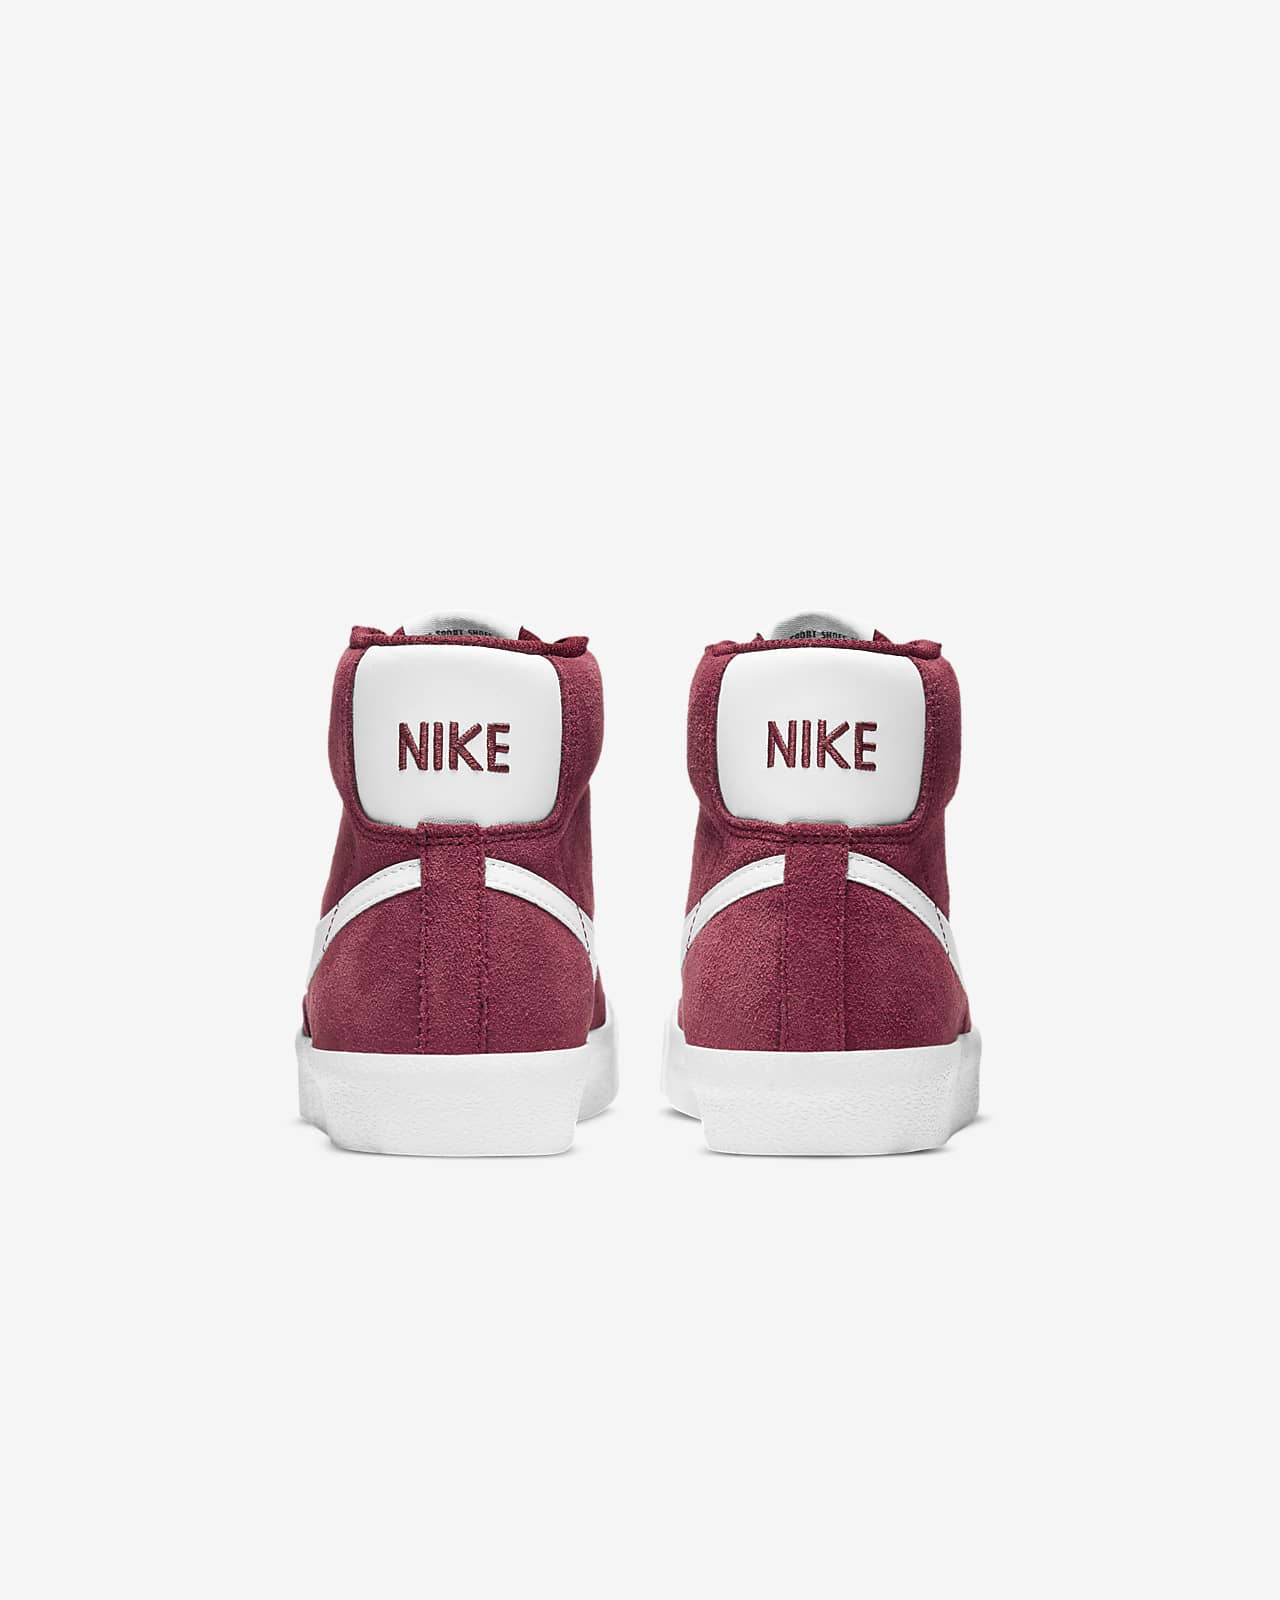 nike blazer mid 77 suede review